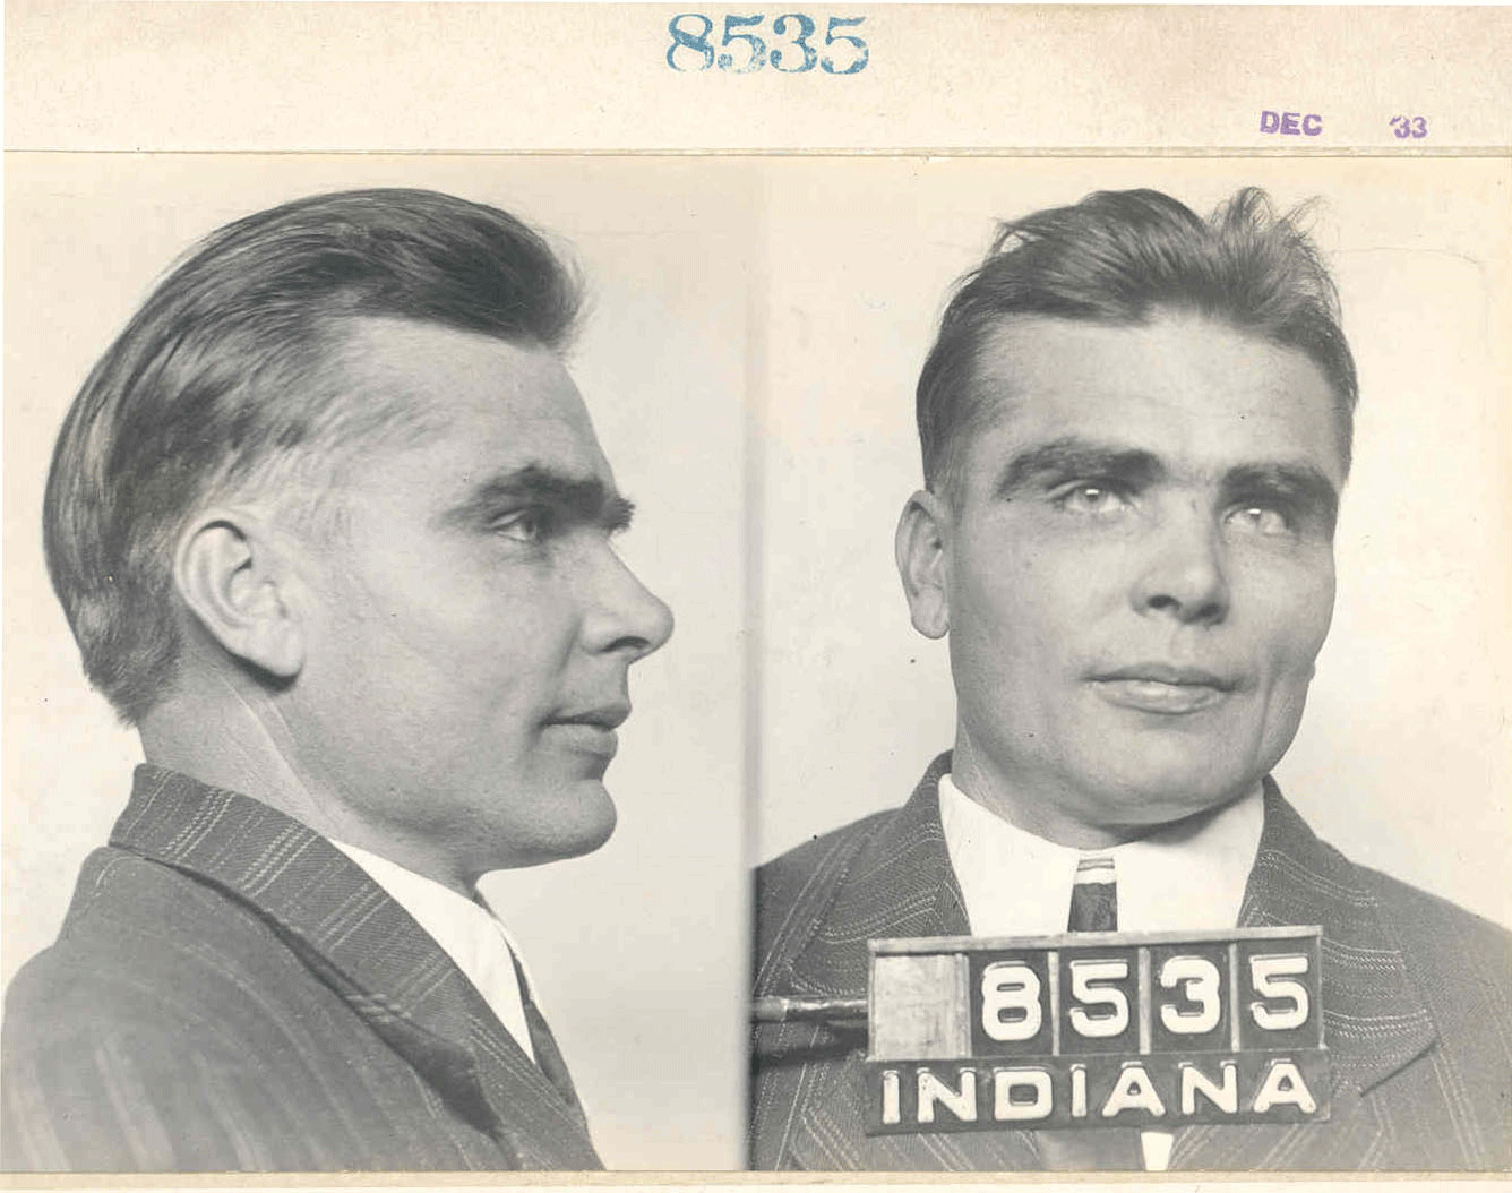 Warren Smith was the subject of the 1921 case, Williams v. Smith, in which the Indiana Supreme Court ruled against the 1907 statute.